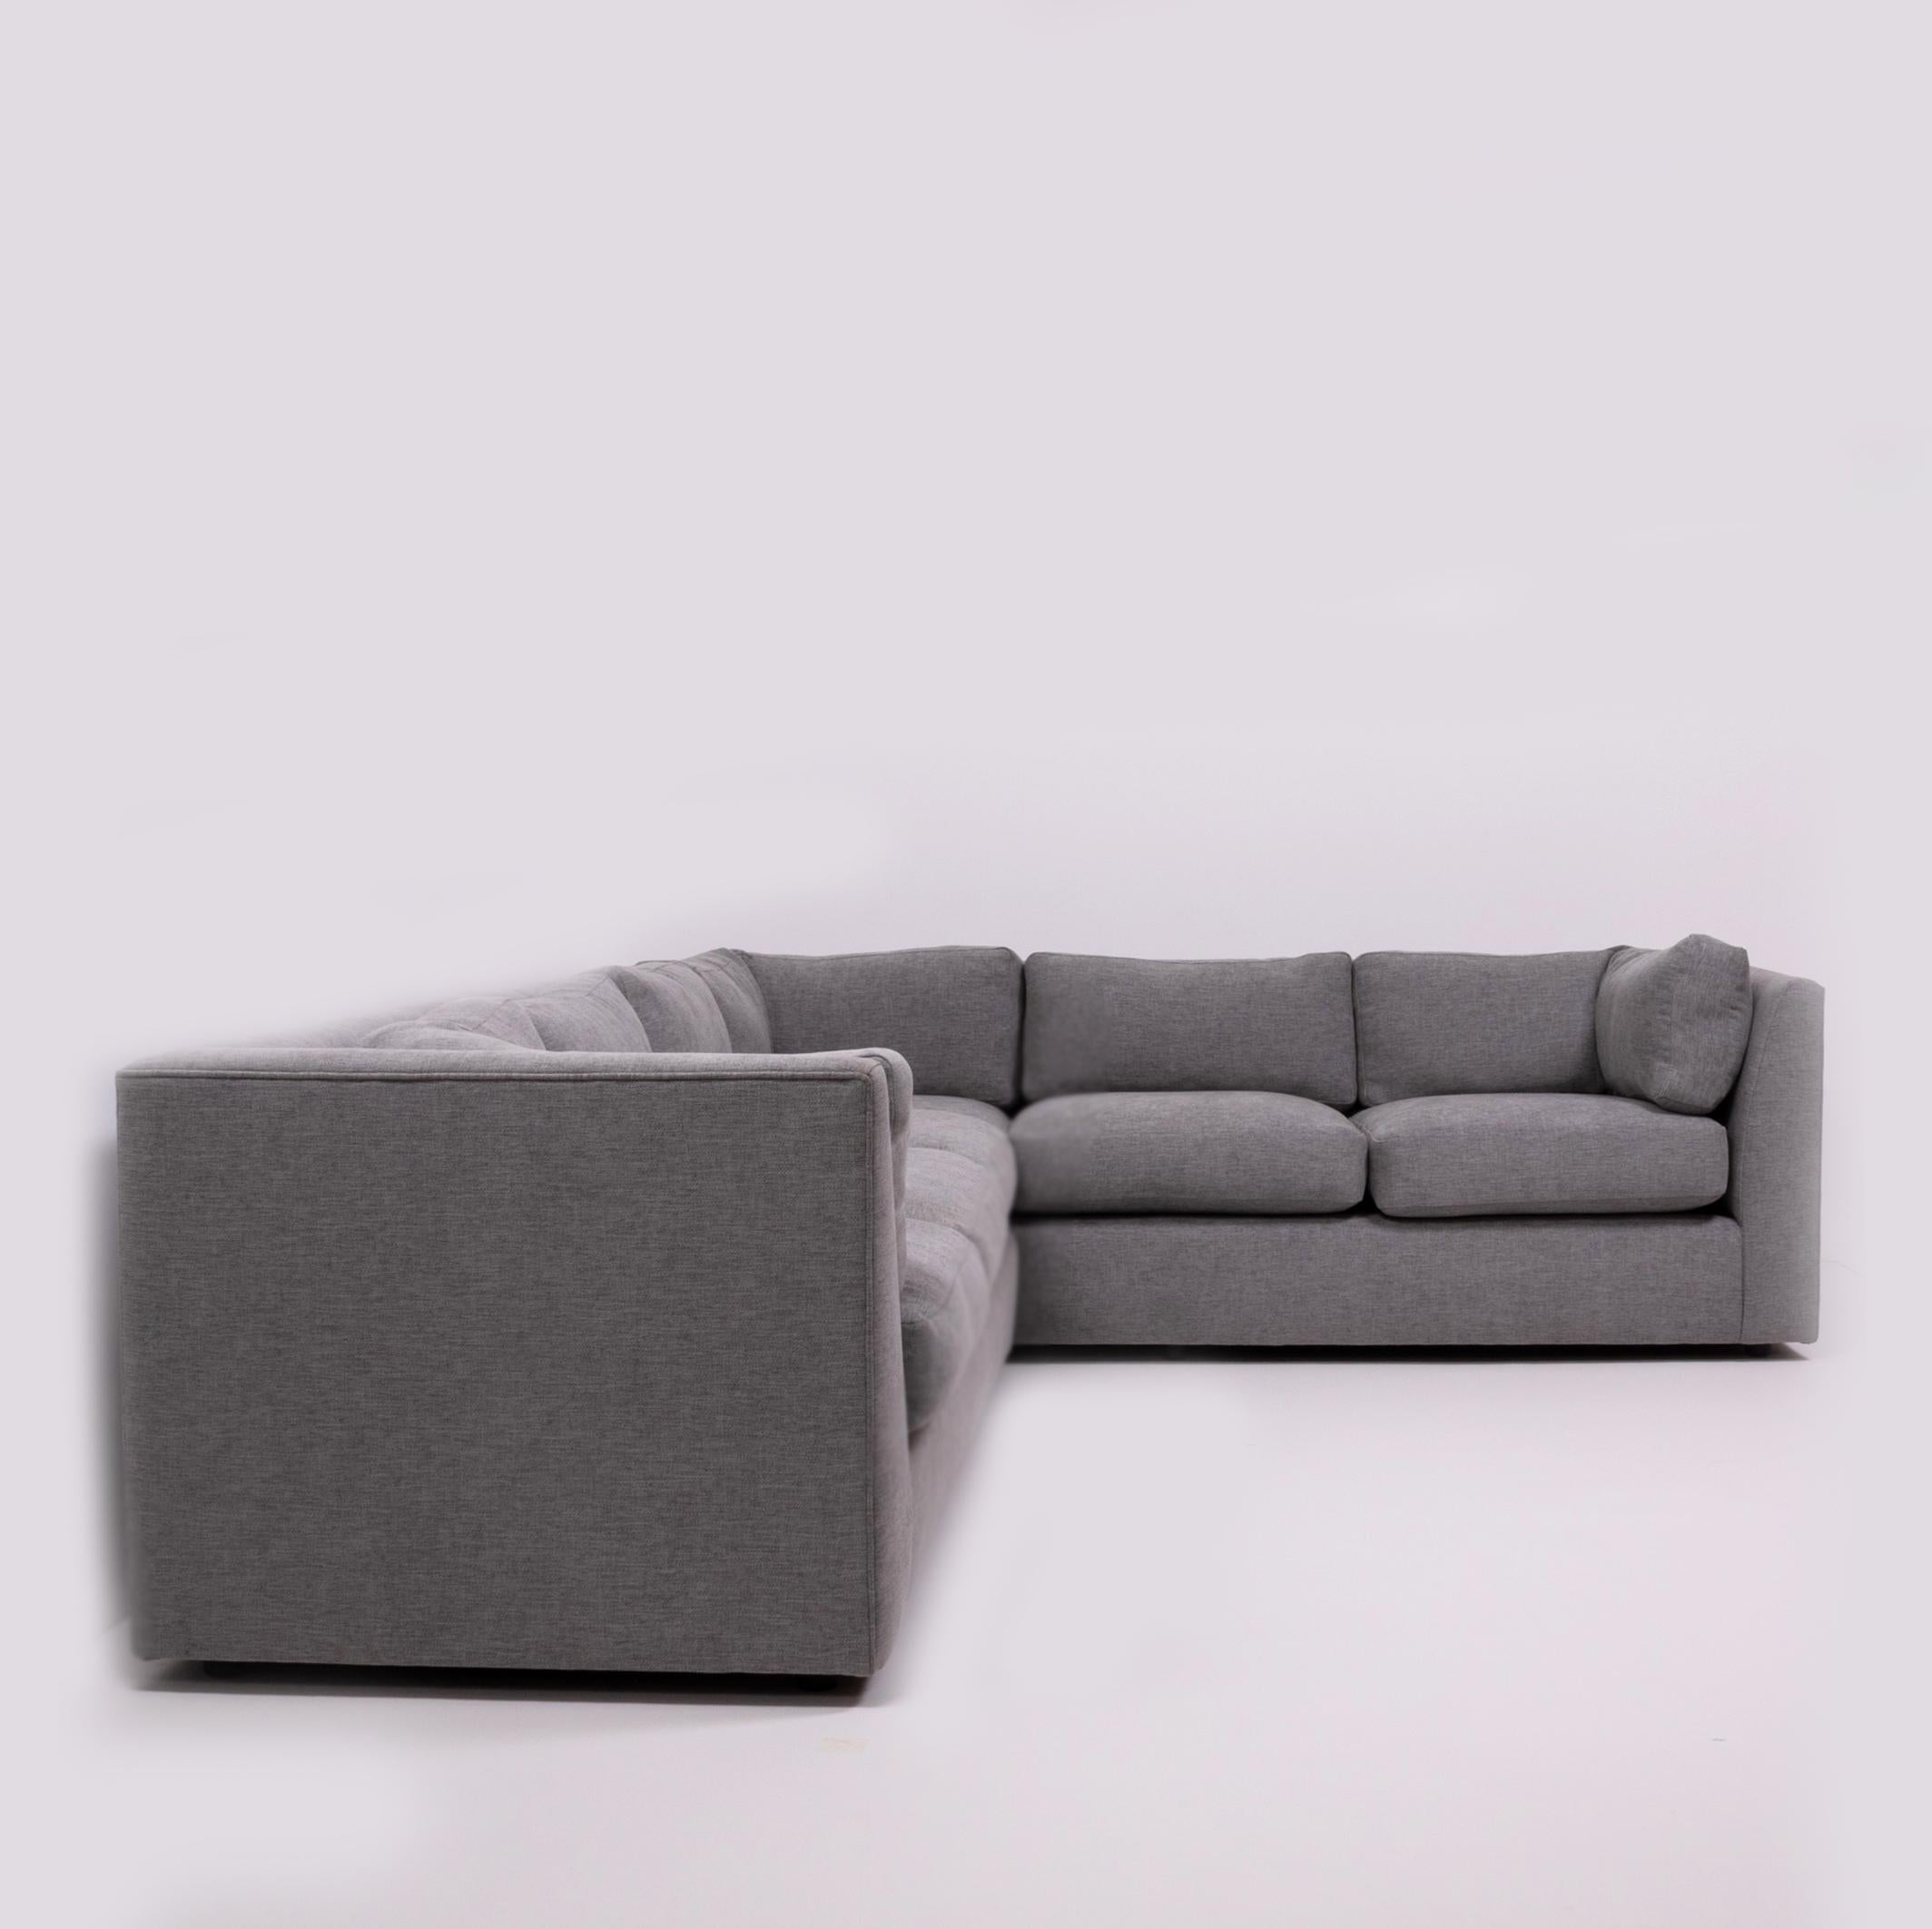 Sleek and simple, this Milo Baughman sectional corner sofa has been newly reupholstered in grey Linara fabric.

Comprising of a three-seat sofa unit and a separate corner unit, the sofa features a slim frame with deep comfortable seating and round